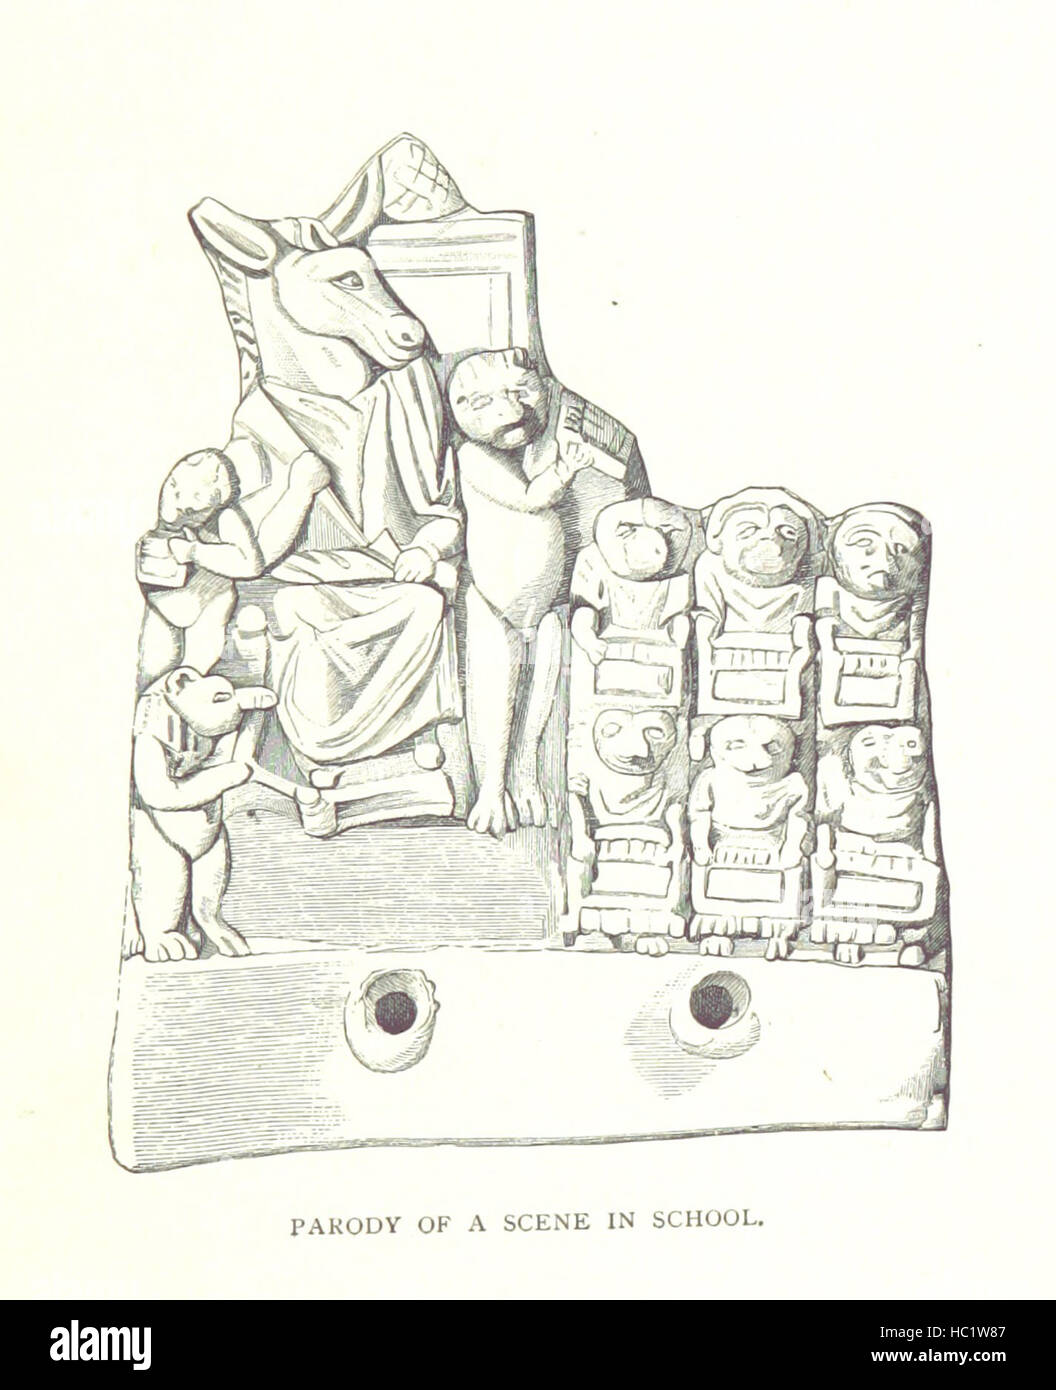 Image taken from page 597 of 'A History of Rome to the death of Cæsar' Image taken from page 597 of 'A History of Rome Stock Photo